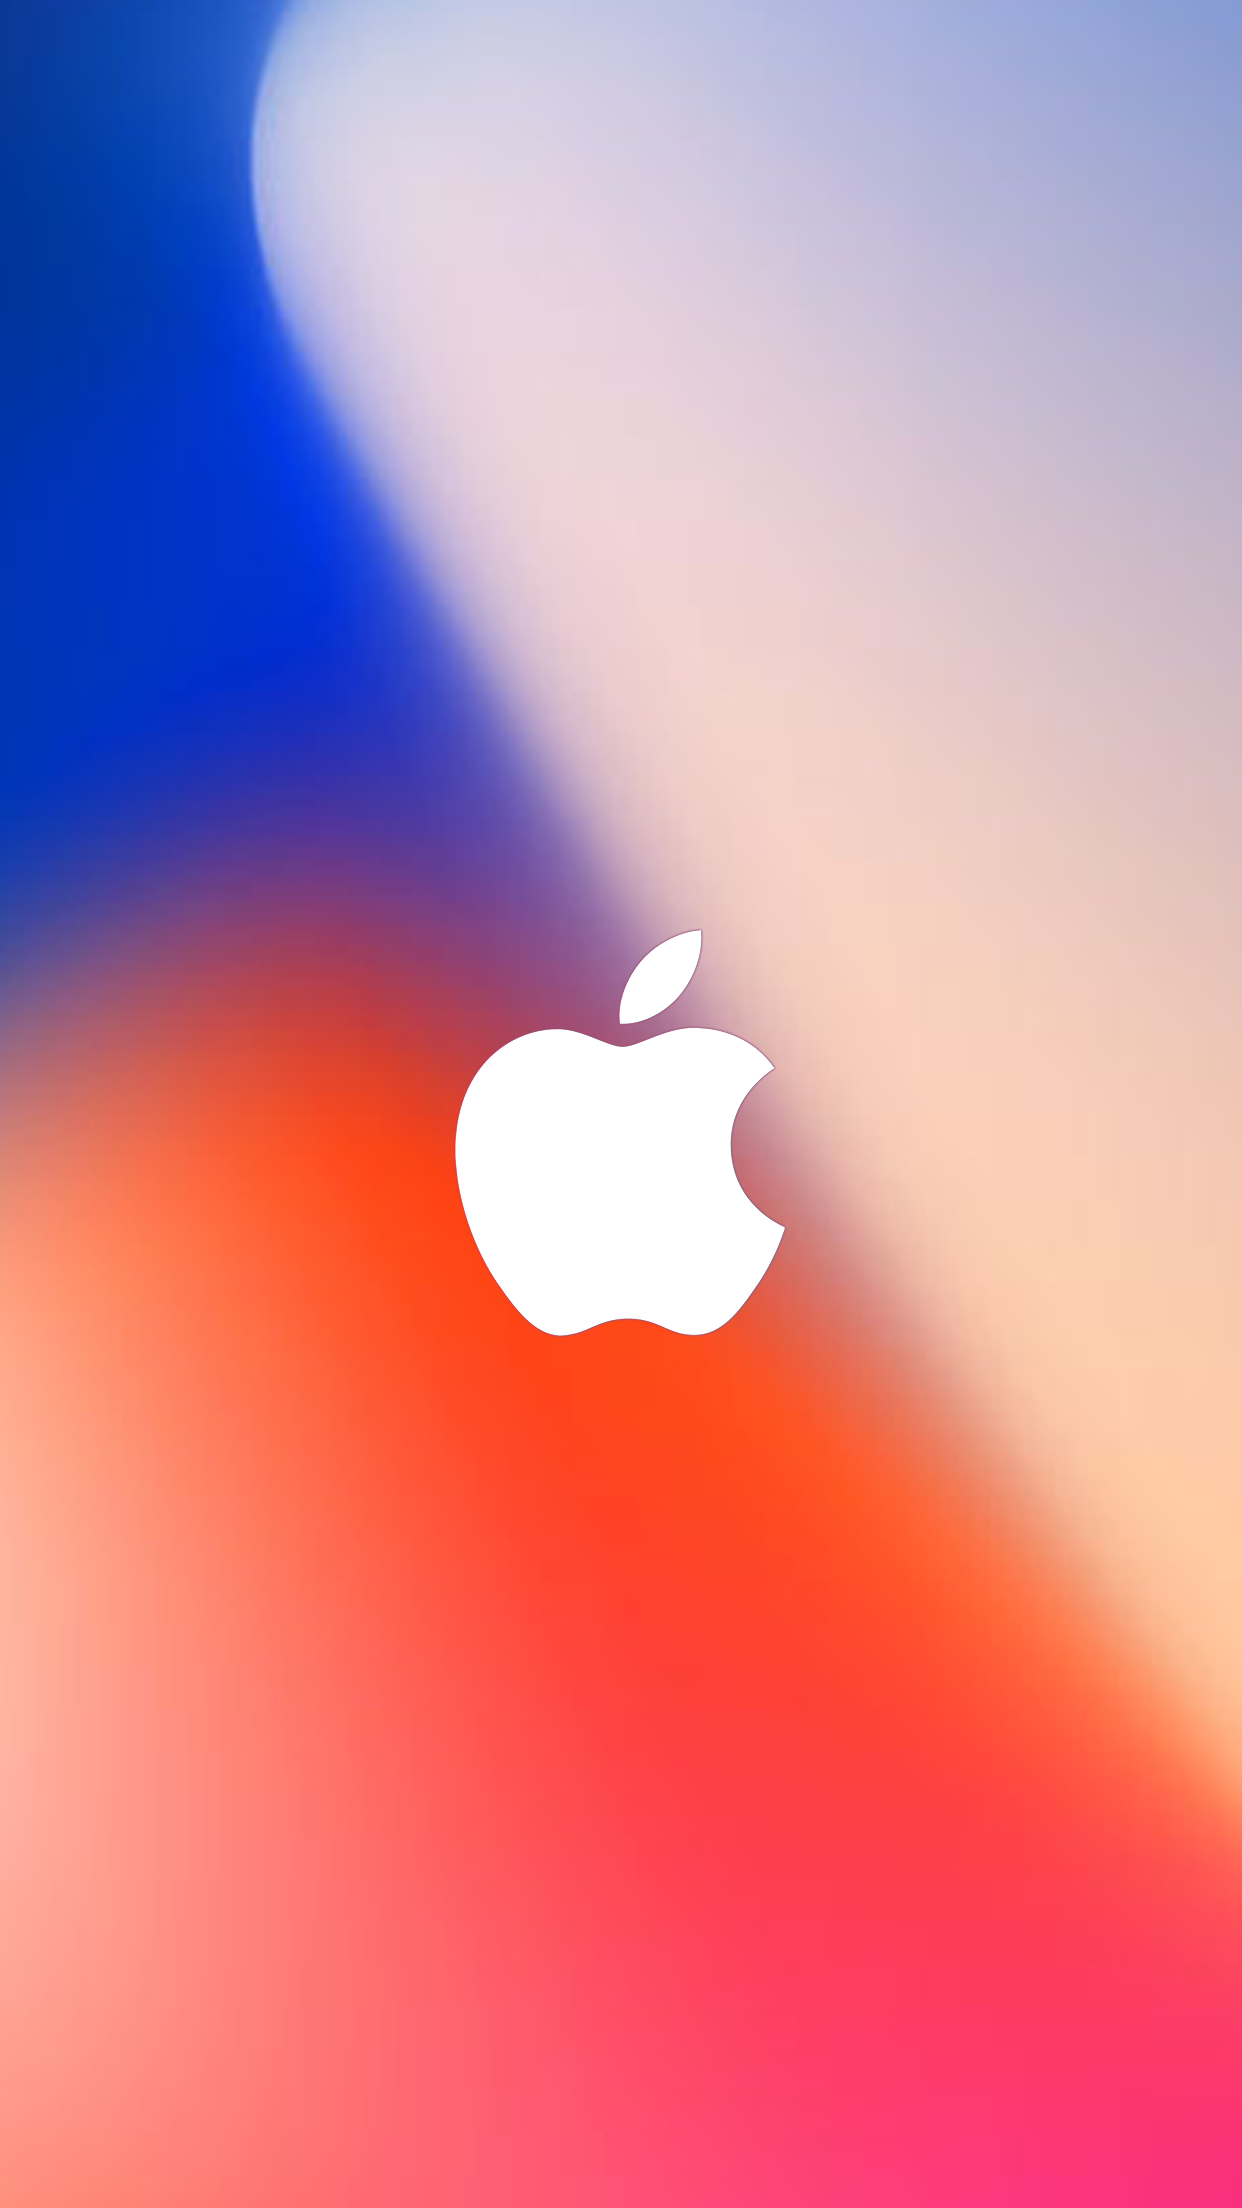 Download iphone x wallpaper hd with apple logo